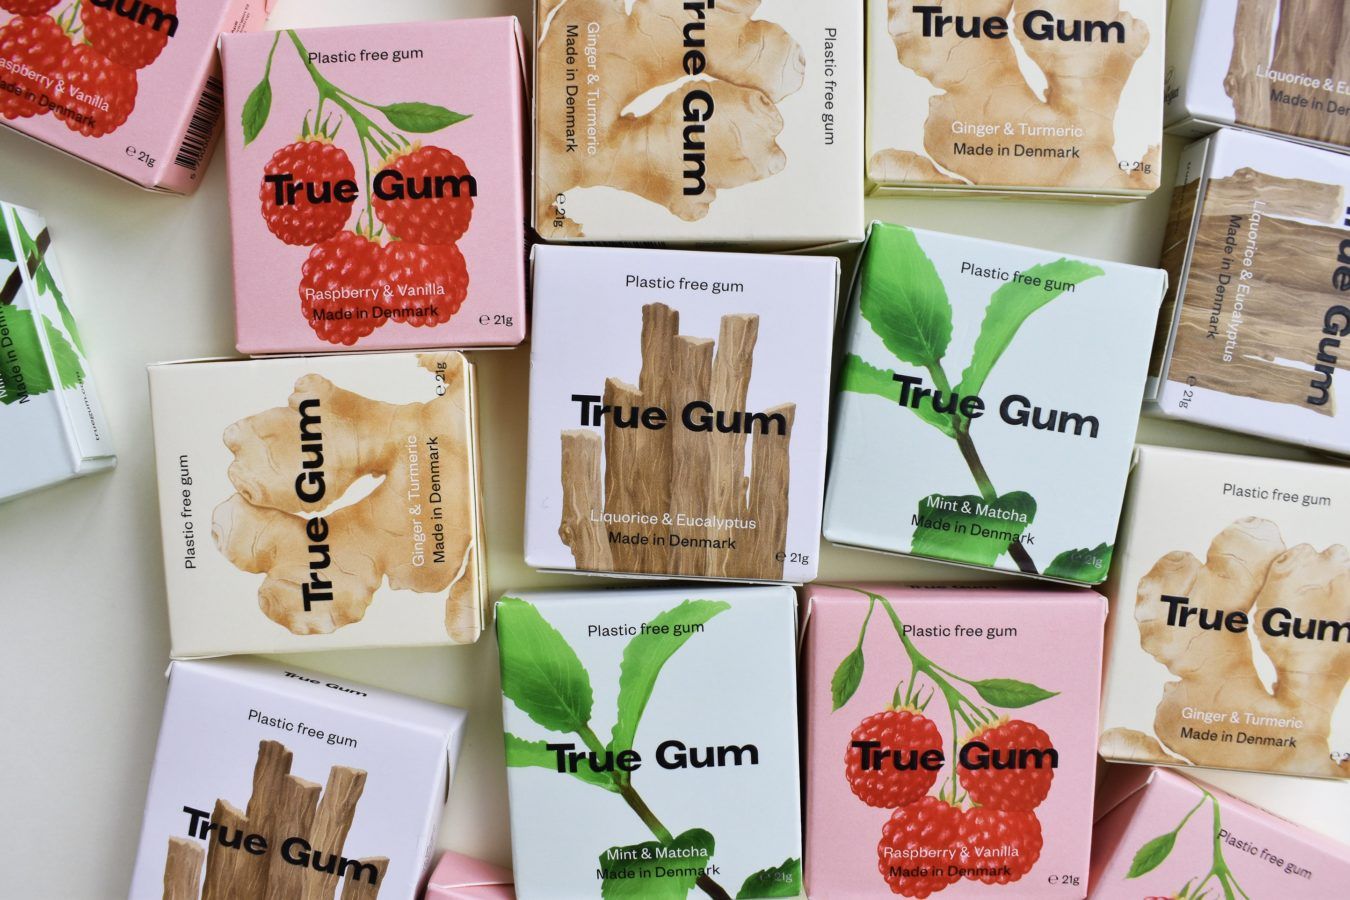 If you’re obsessed with chewing gum, you’re going to love True Gum’s vegan alternative